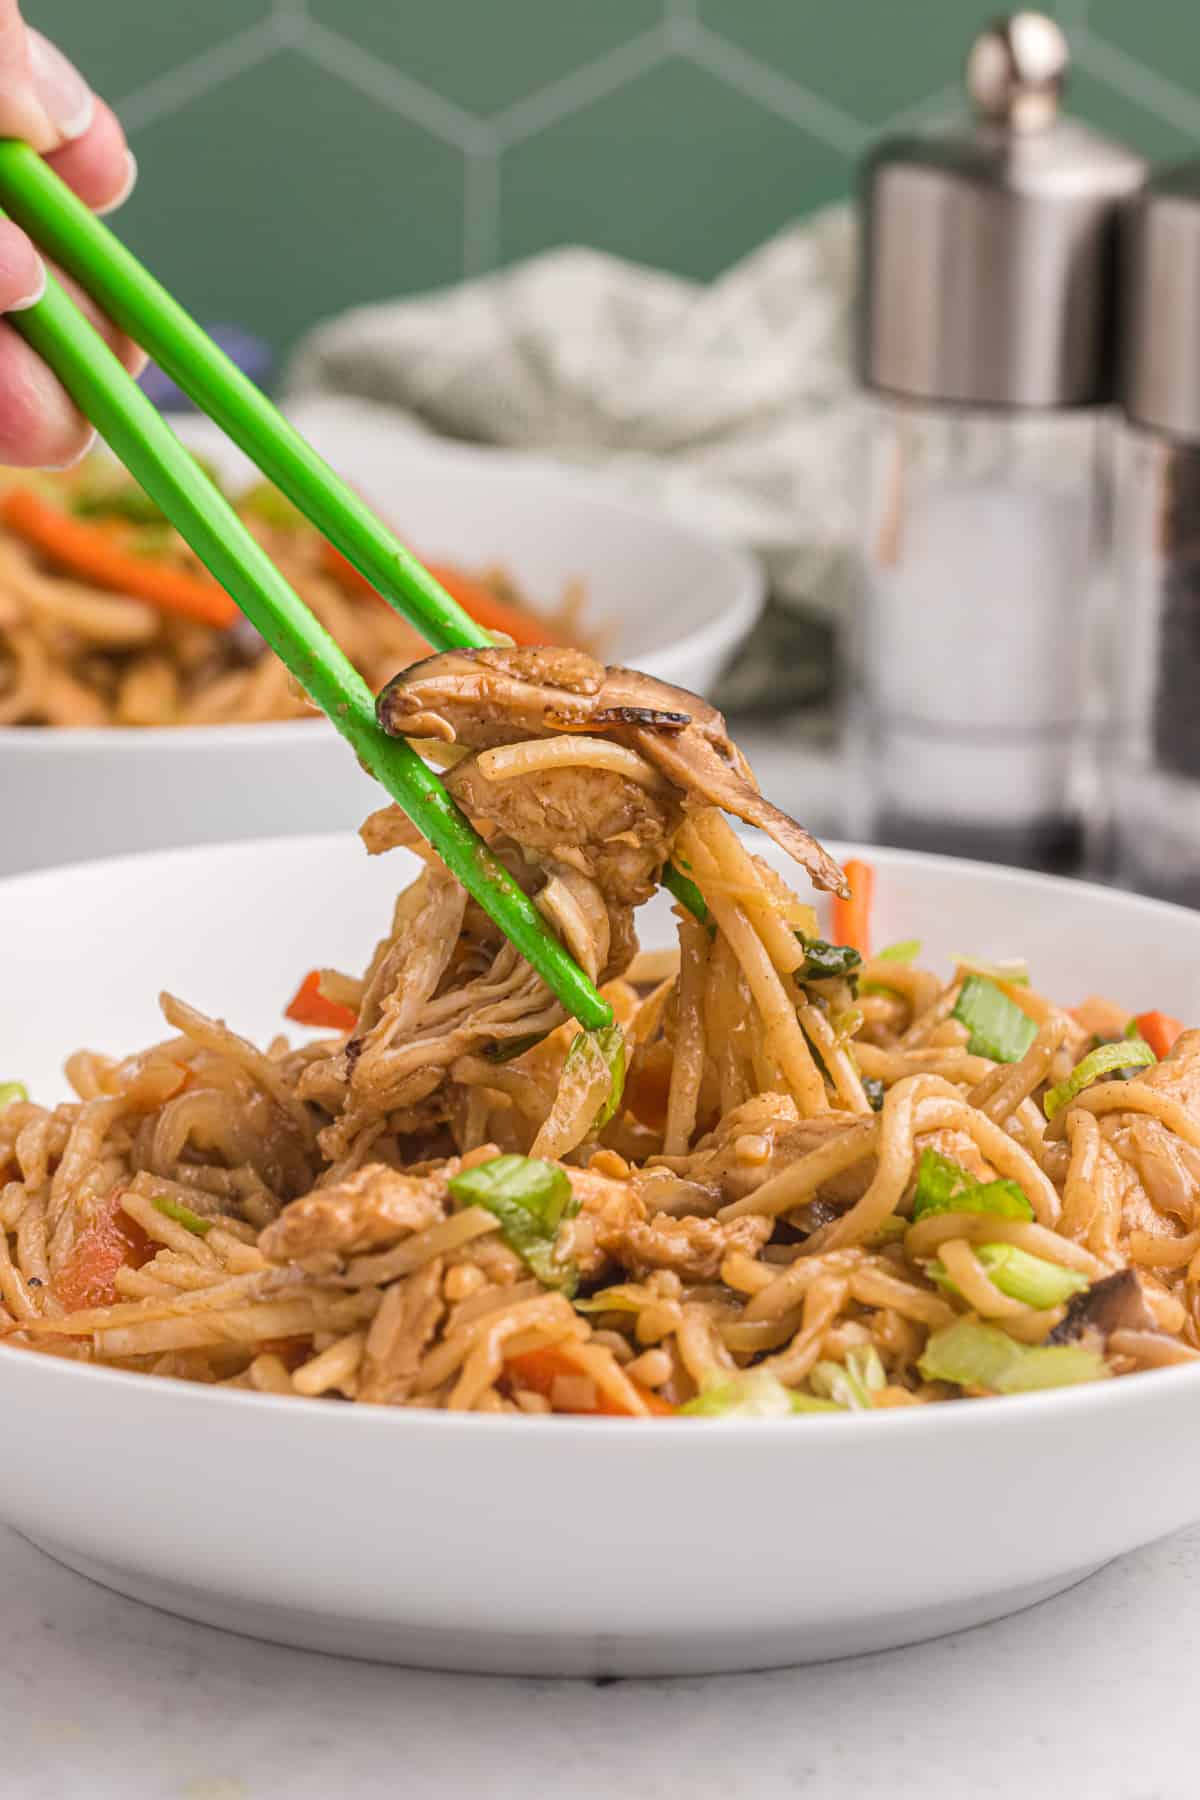 Yakisoba is being lifted from a white serving dish with green chopsticks.